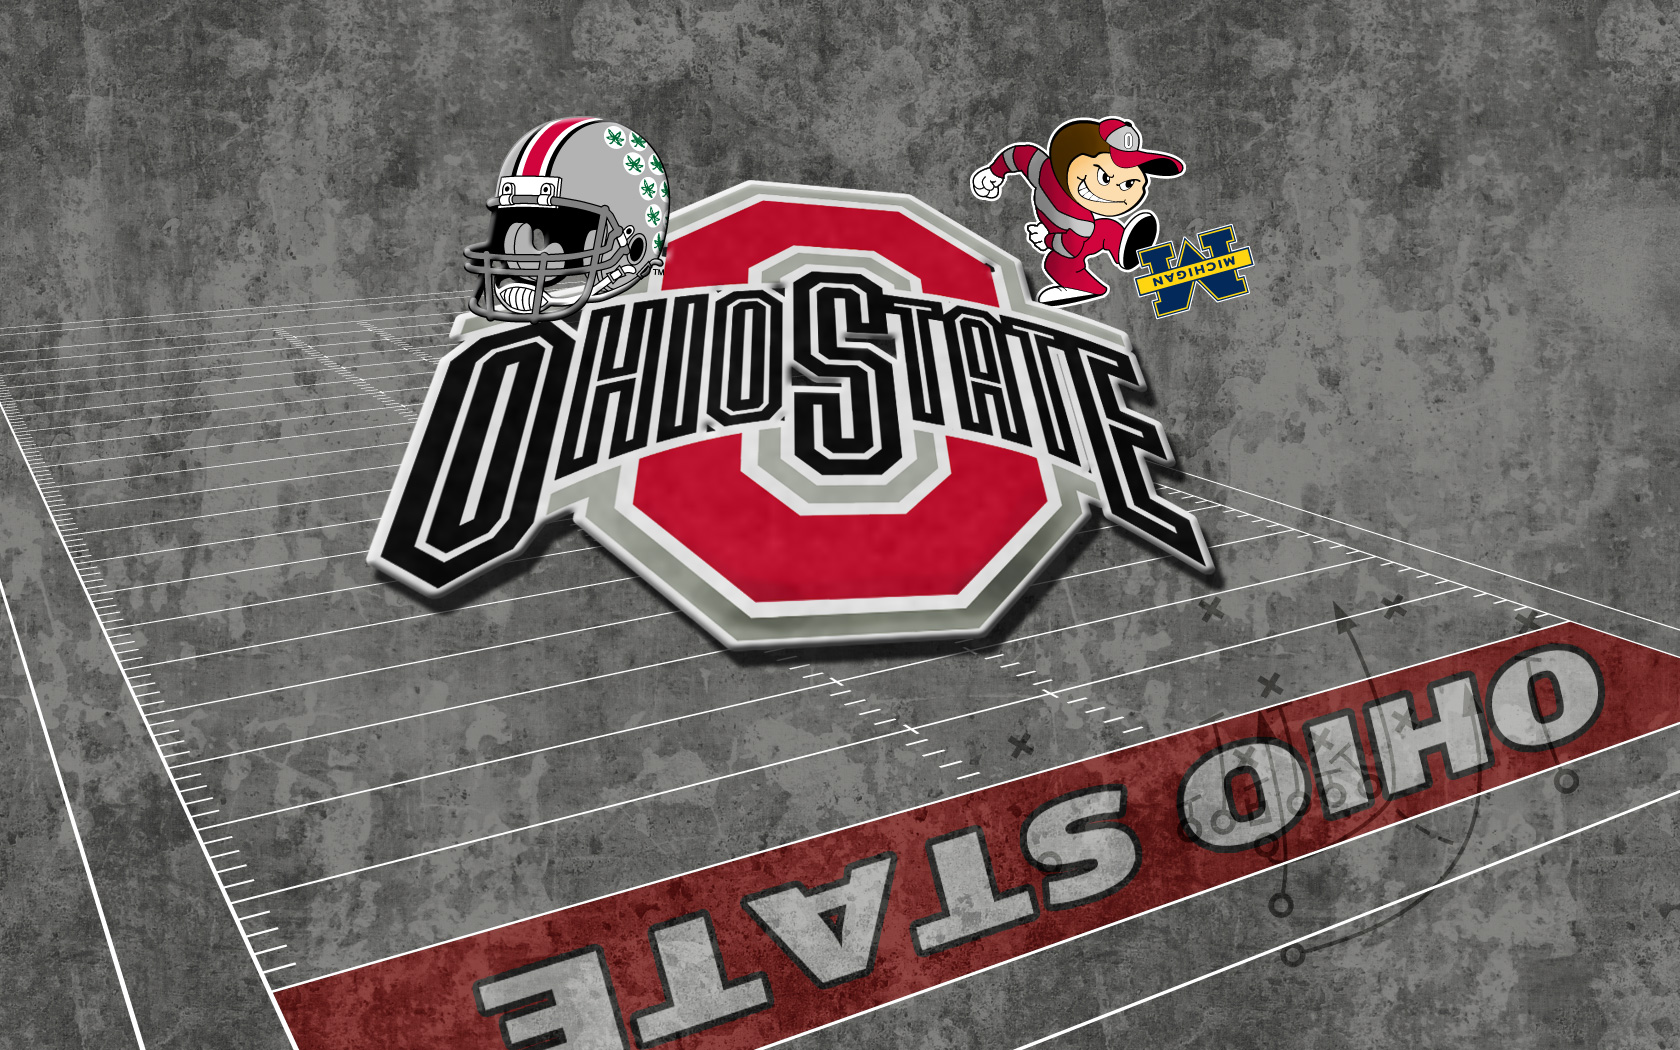 Ohio State Michigan Wallpaper And Browser Themes